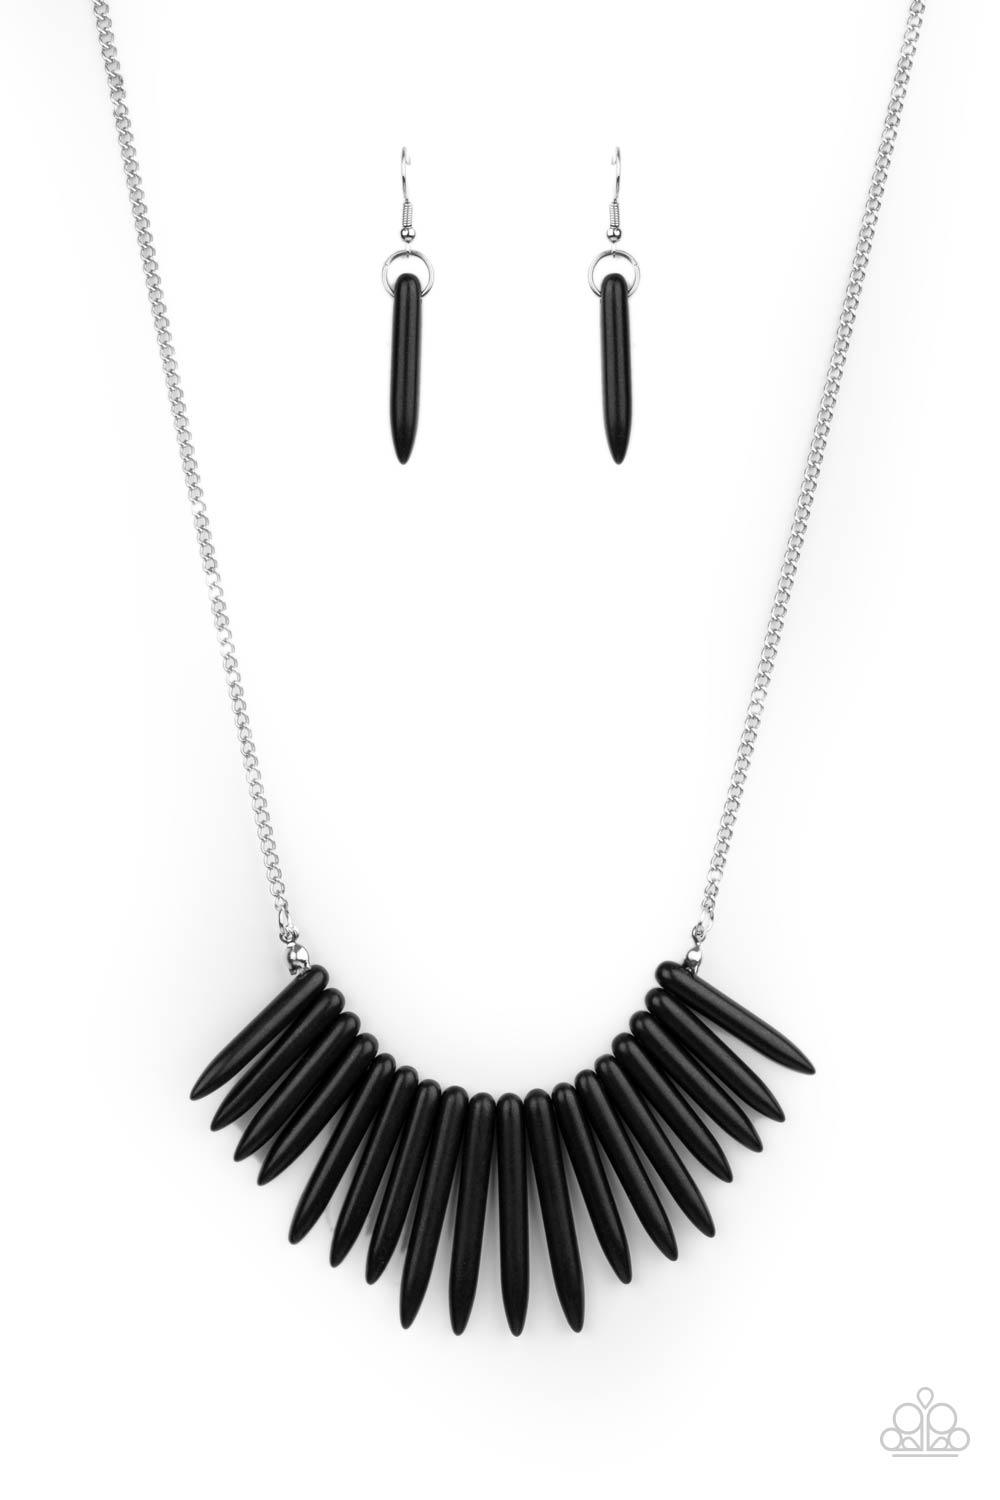 Paparazzi Accessories Exotic Edge - Black A daring fringe of black stone spikes in gradually decreasing sizes flares out below the collar for an exotic and edgy effect. Features an adjustable clasp closure. Sold as one individual necklace. Includes one pa